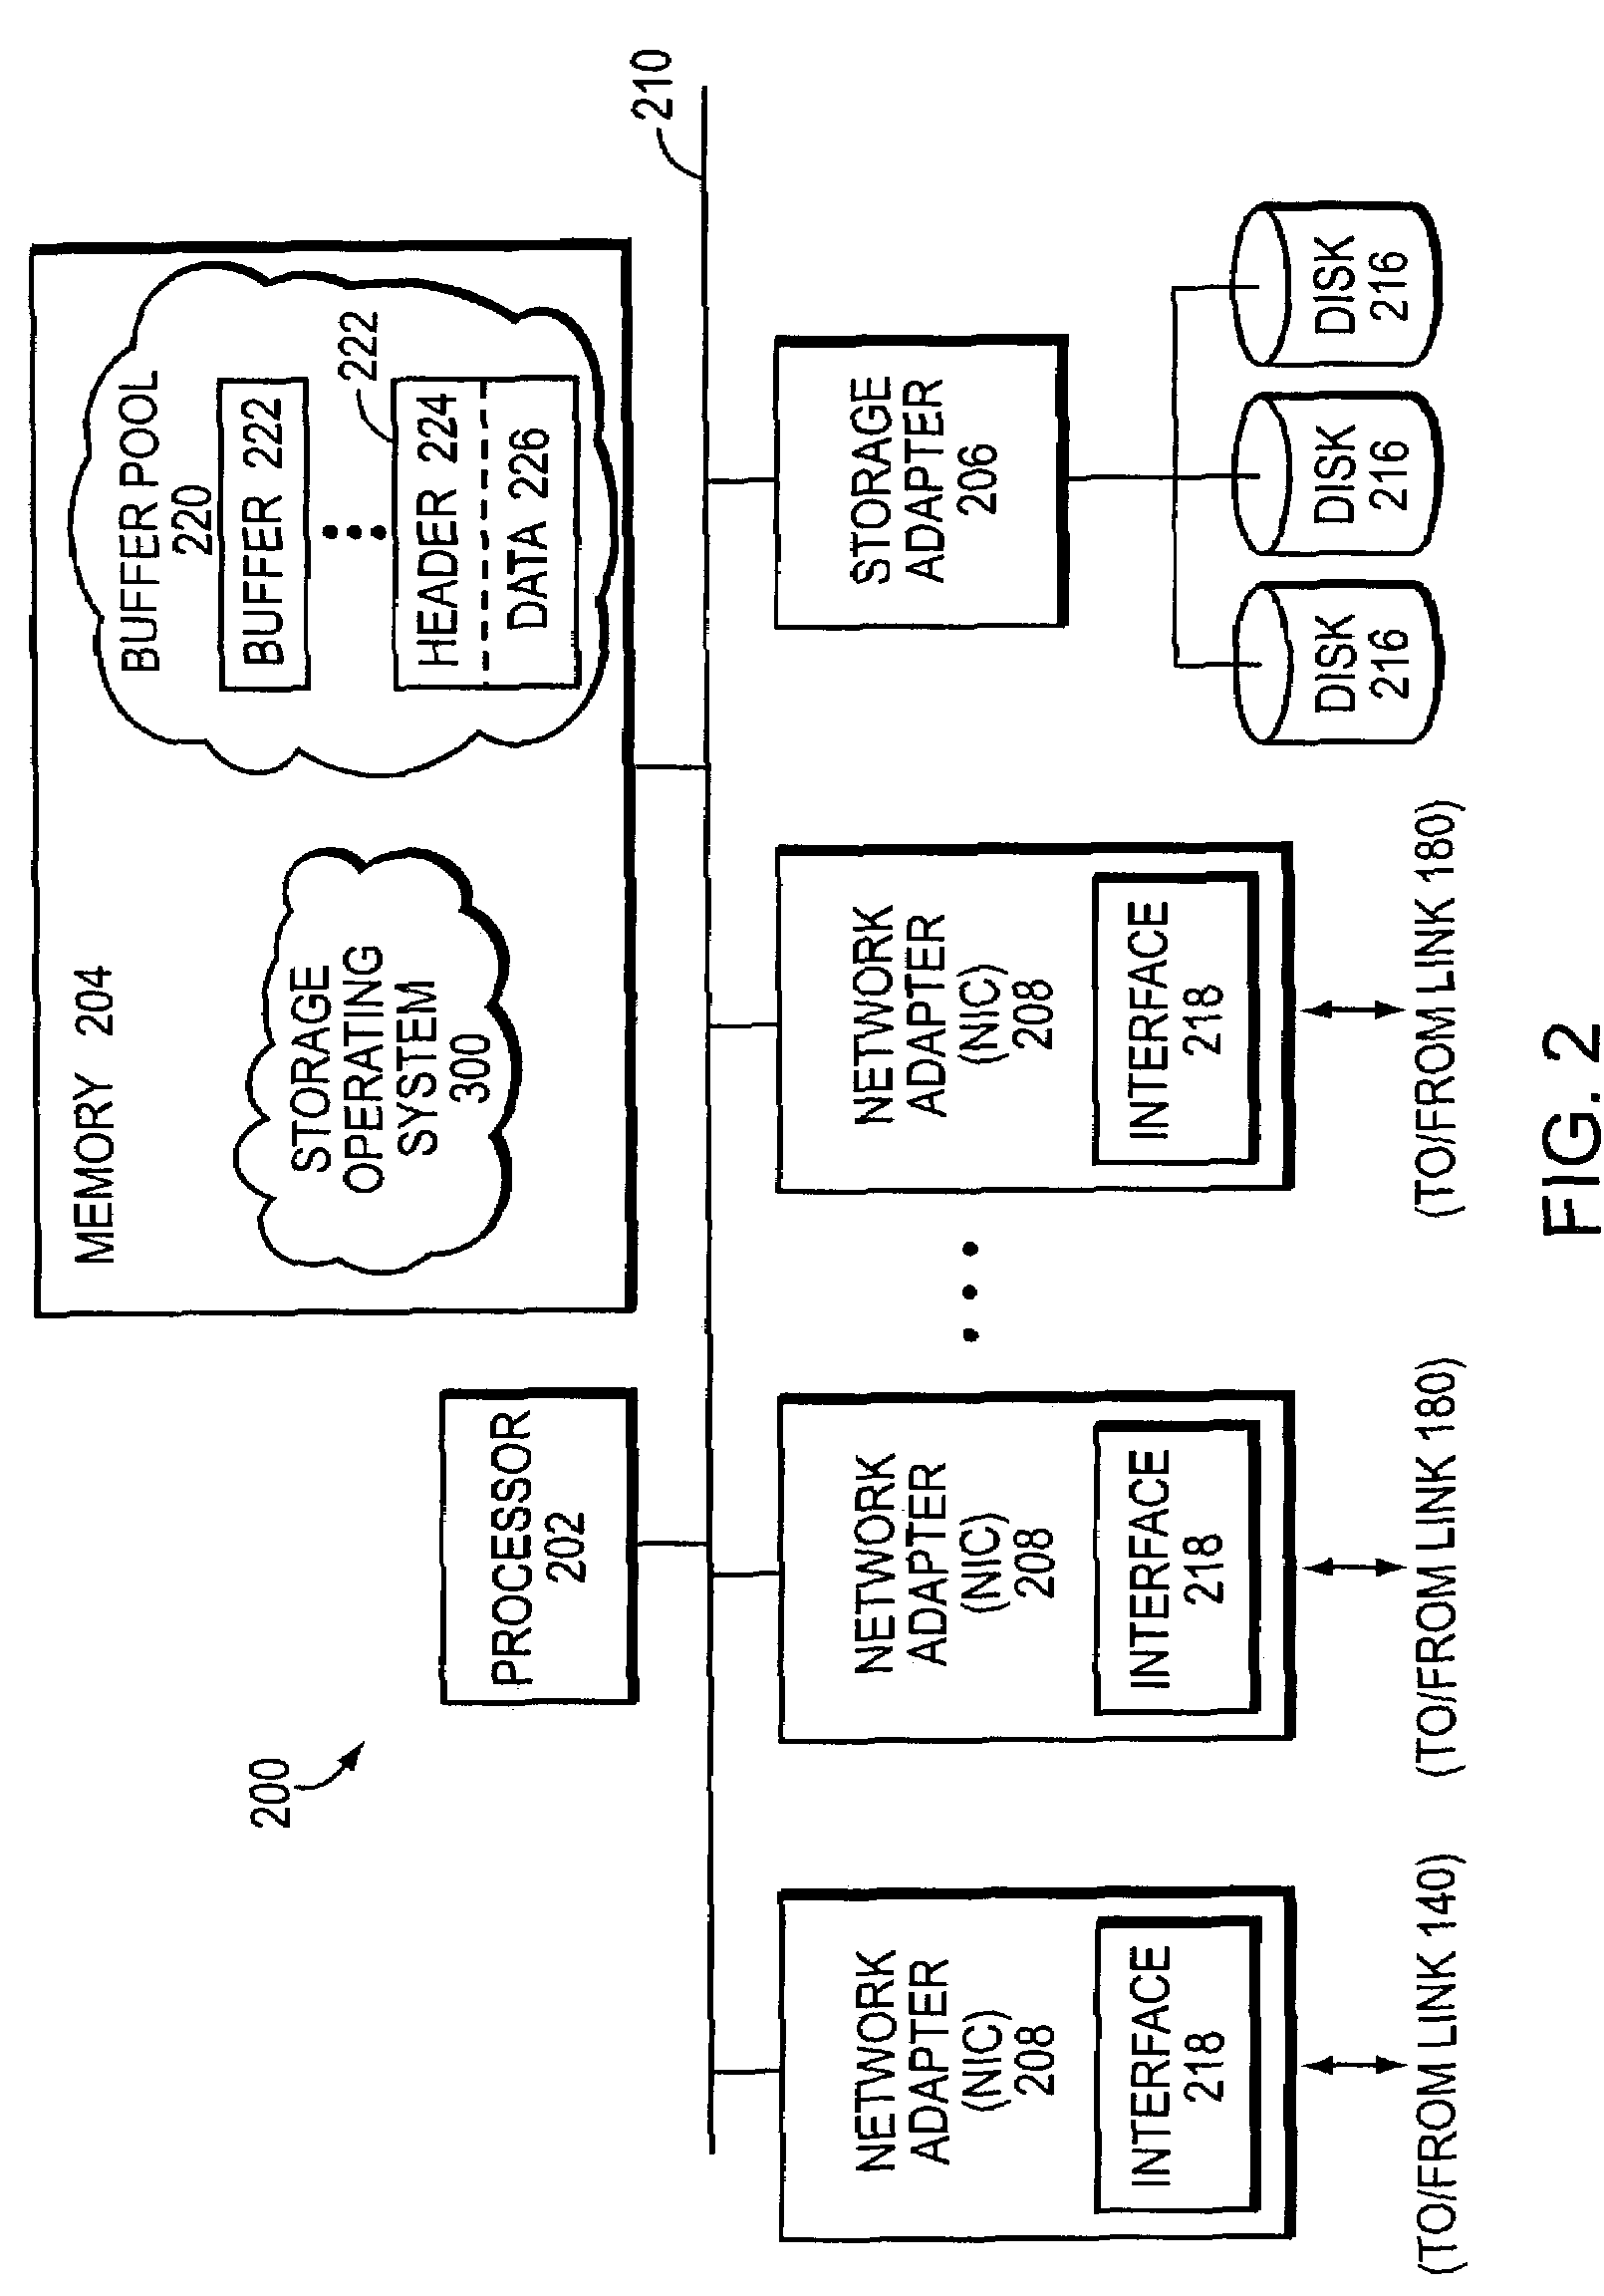 Method and apparatus for encapsulating a virtual filer on a filer